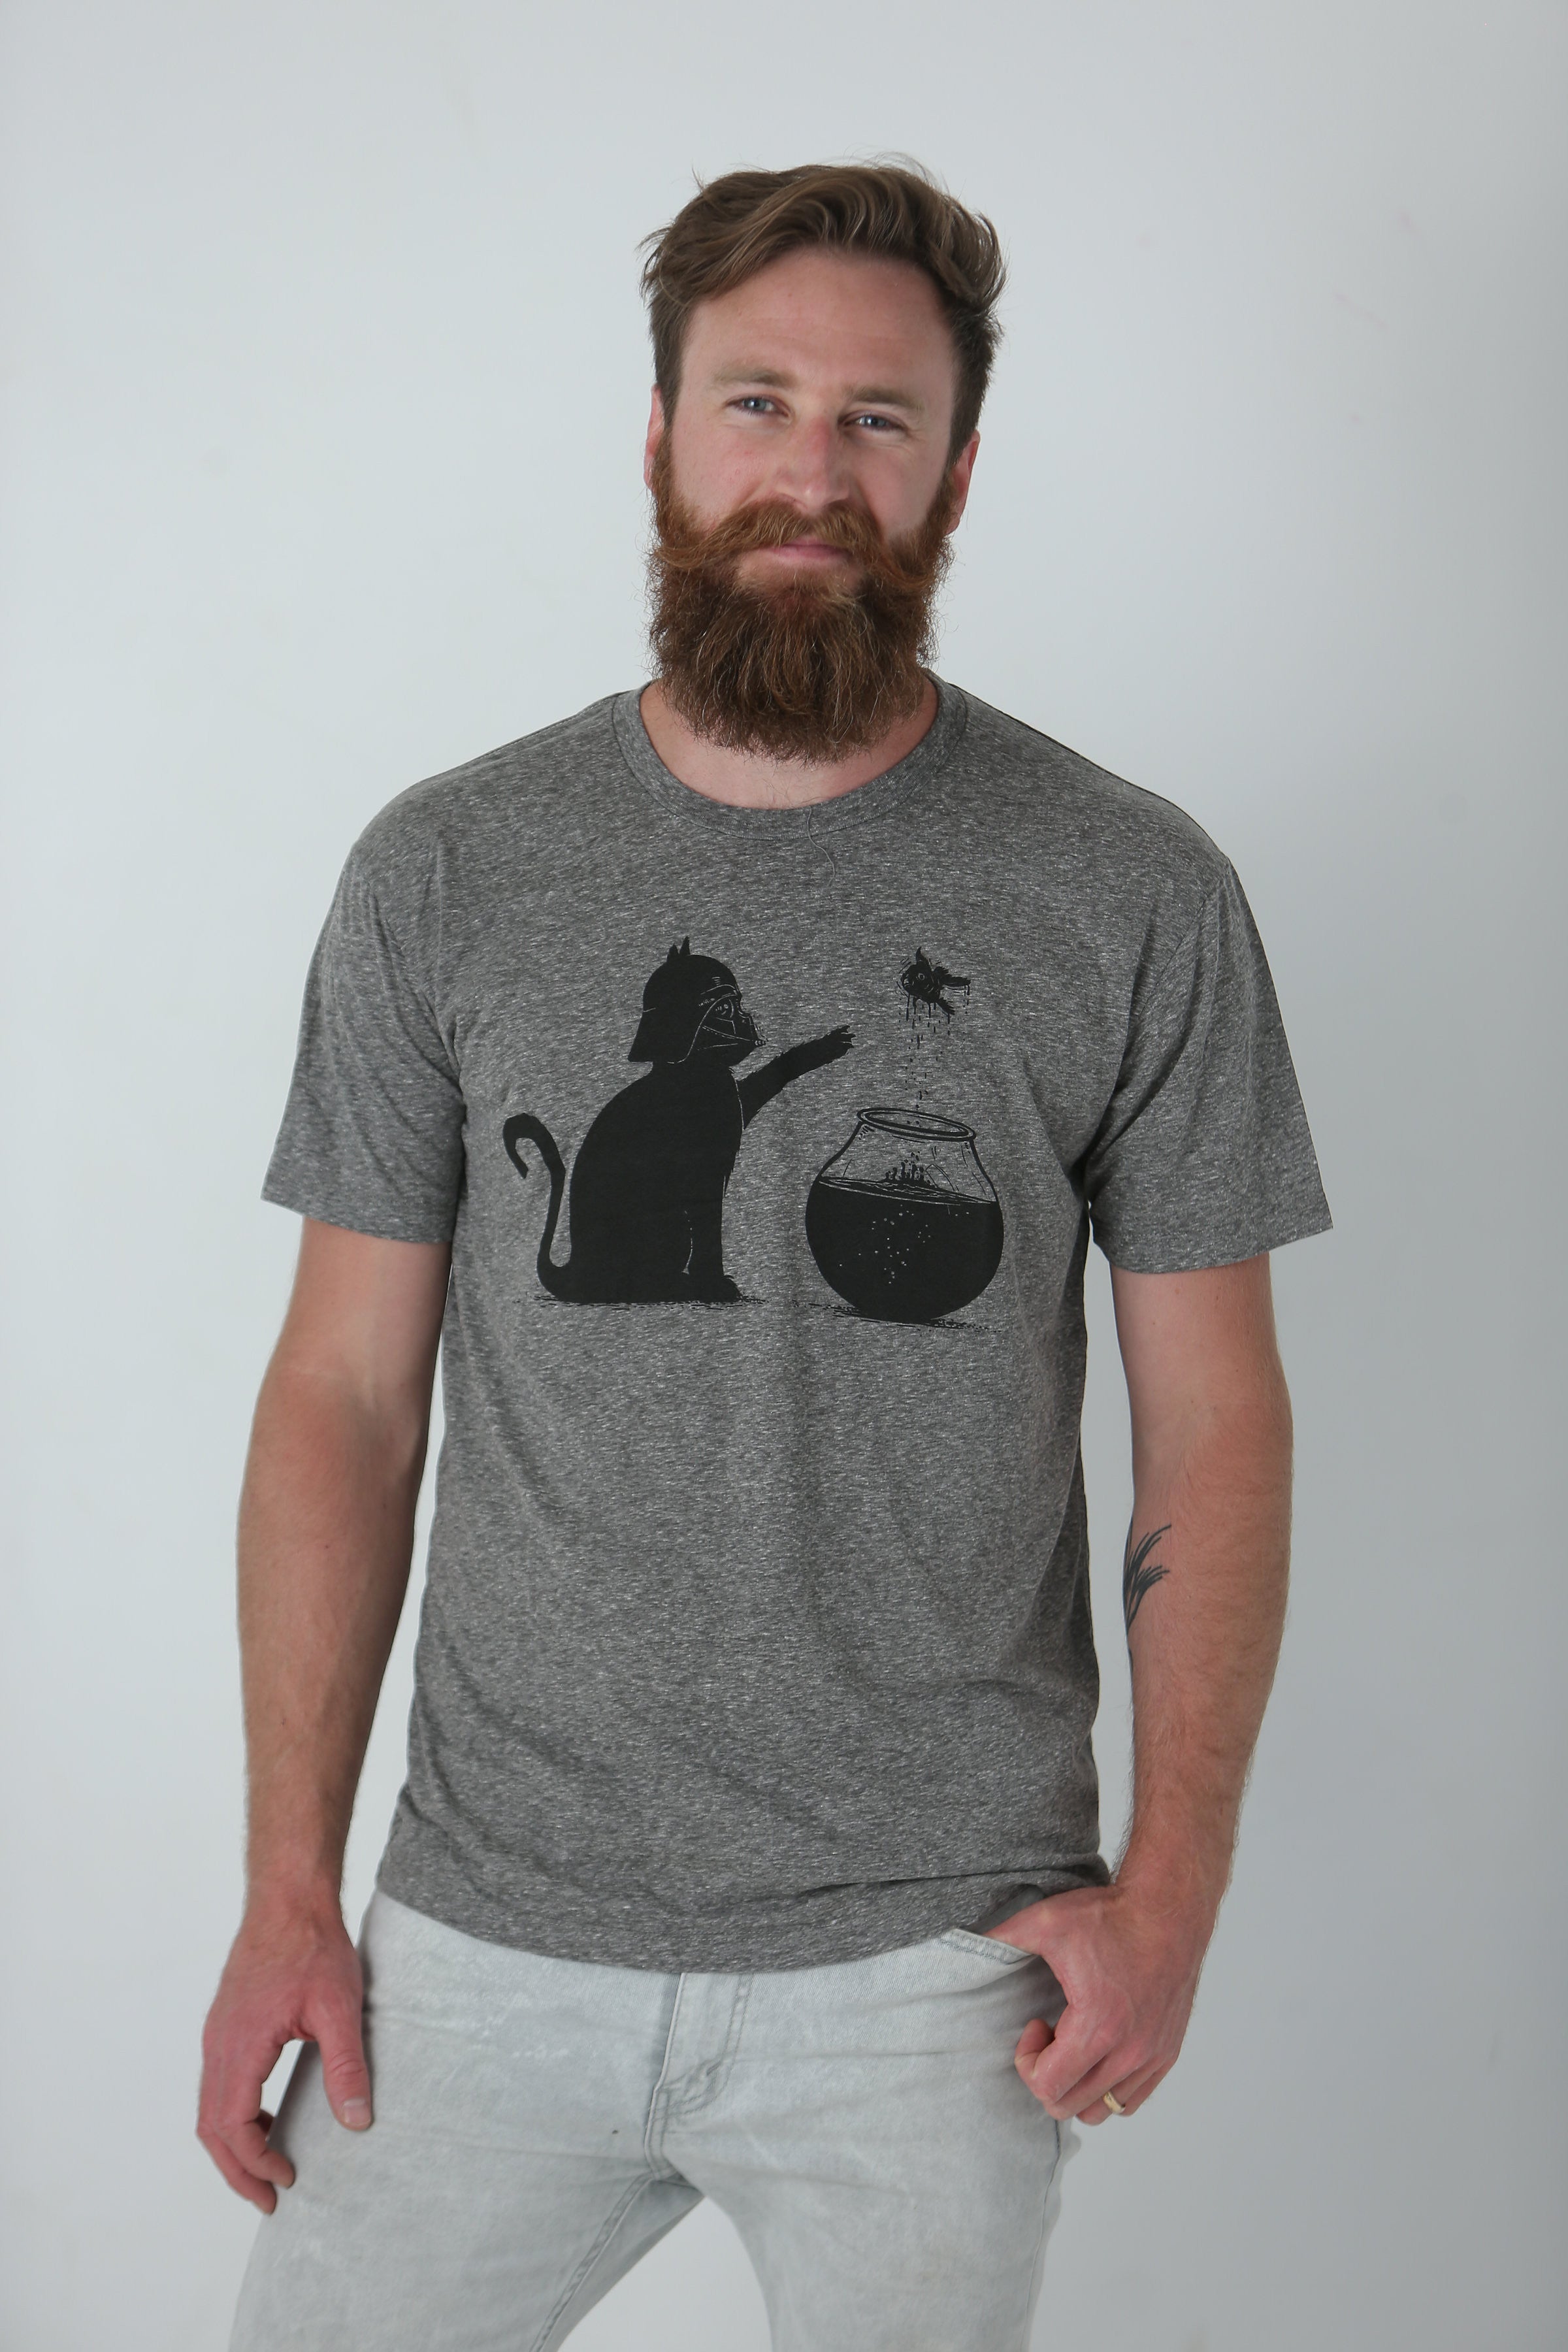 All Too Easy T-Shirt - Tractor Beam Apparel